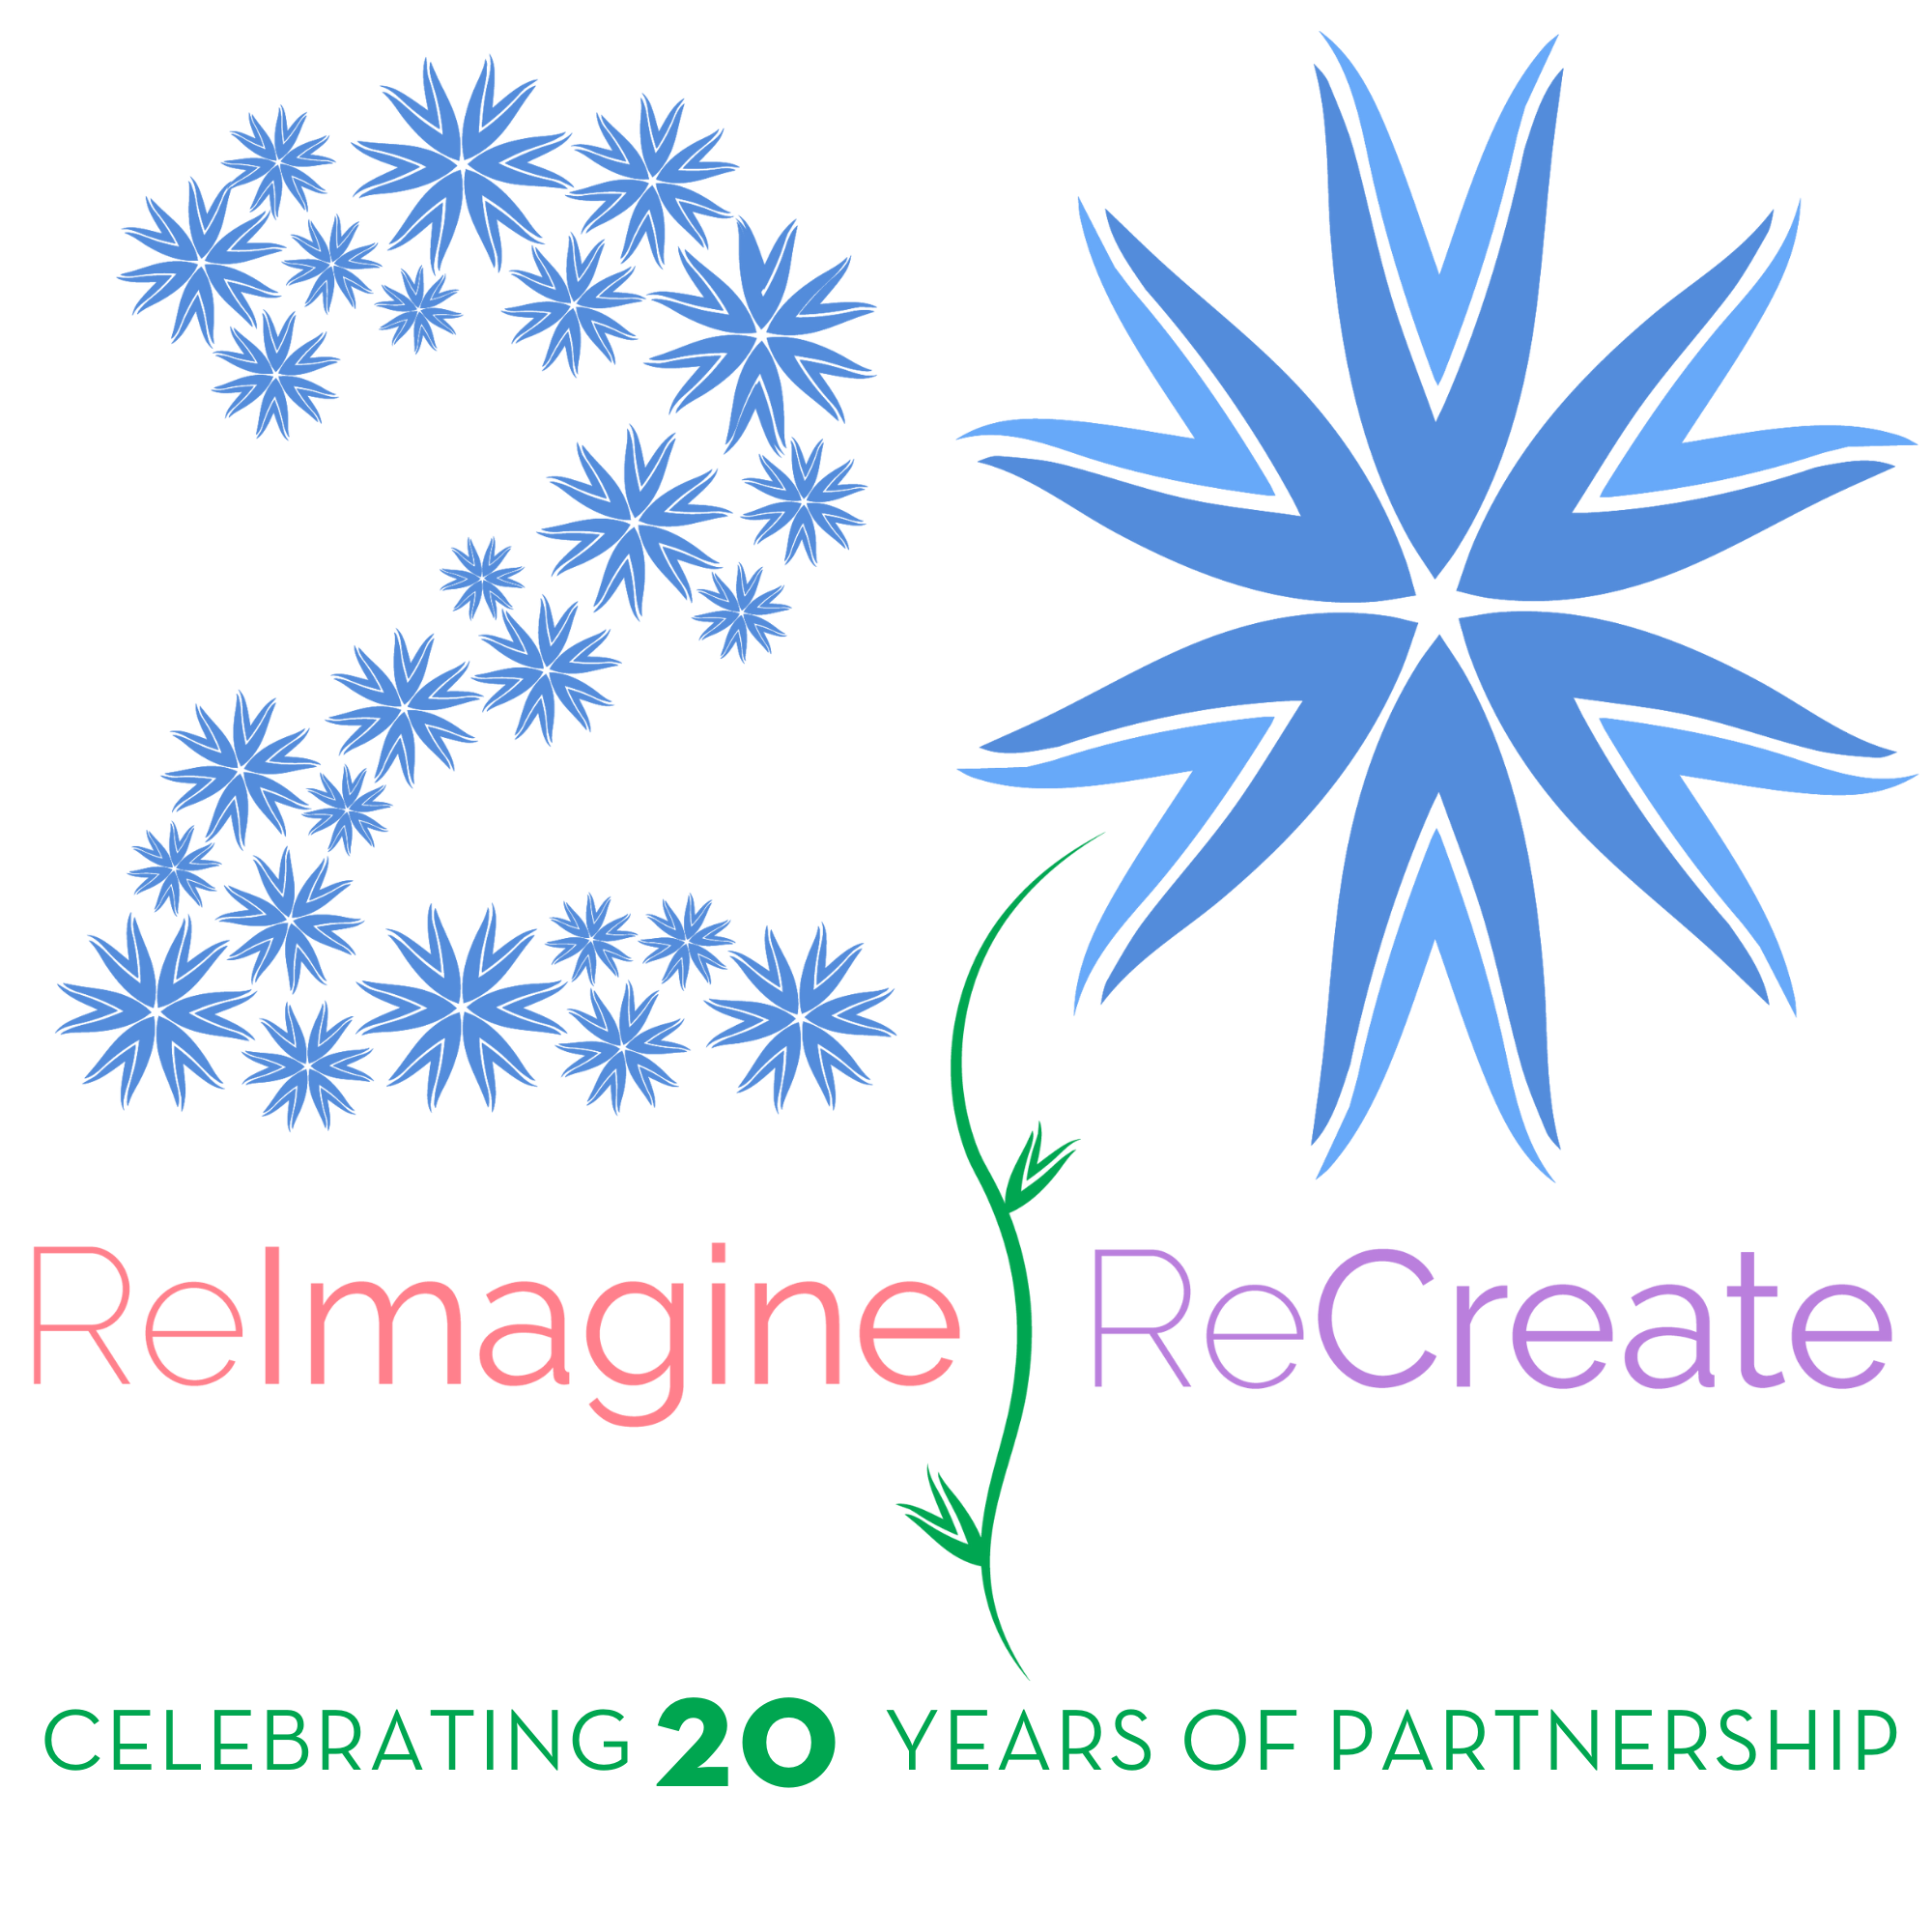 20 year anniversary logo with 20 made out of blue starbursts and colorful text saying ReImagine ReCreate